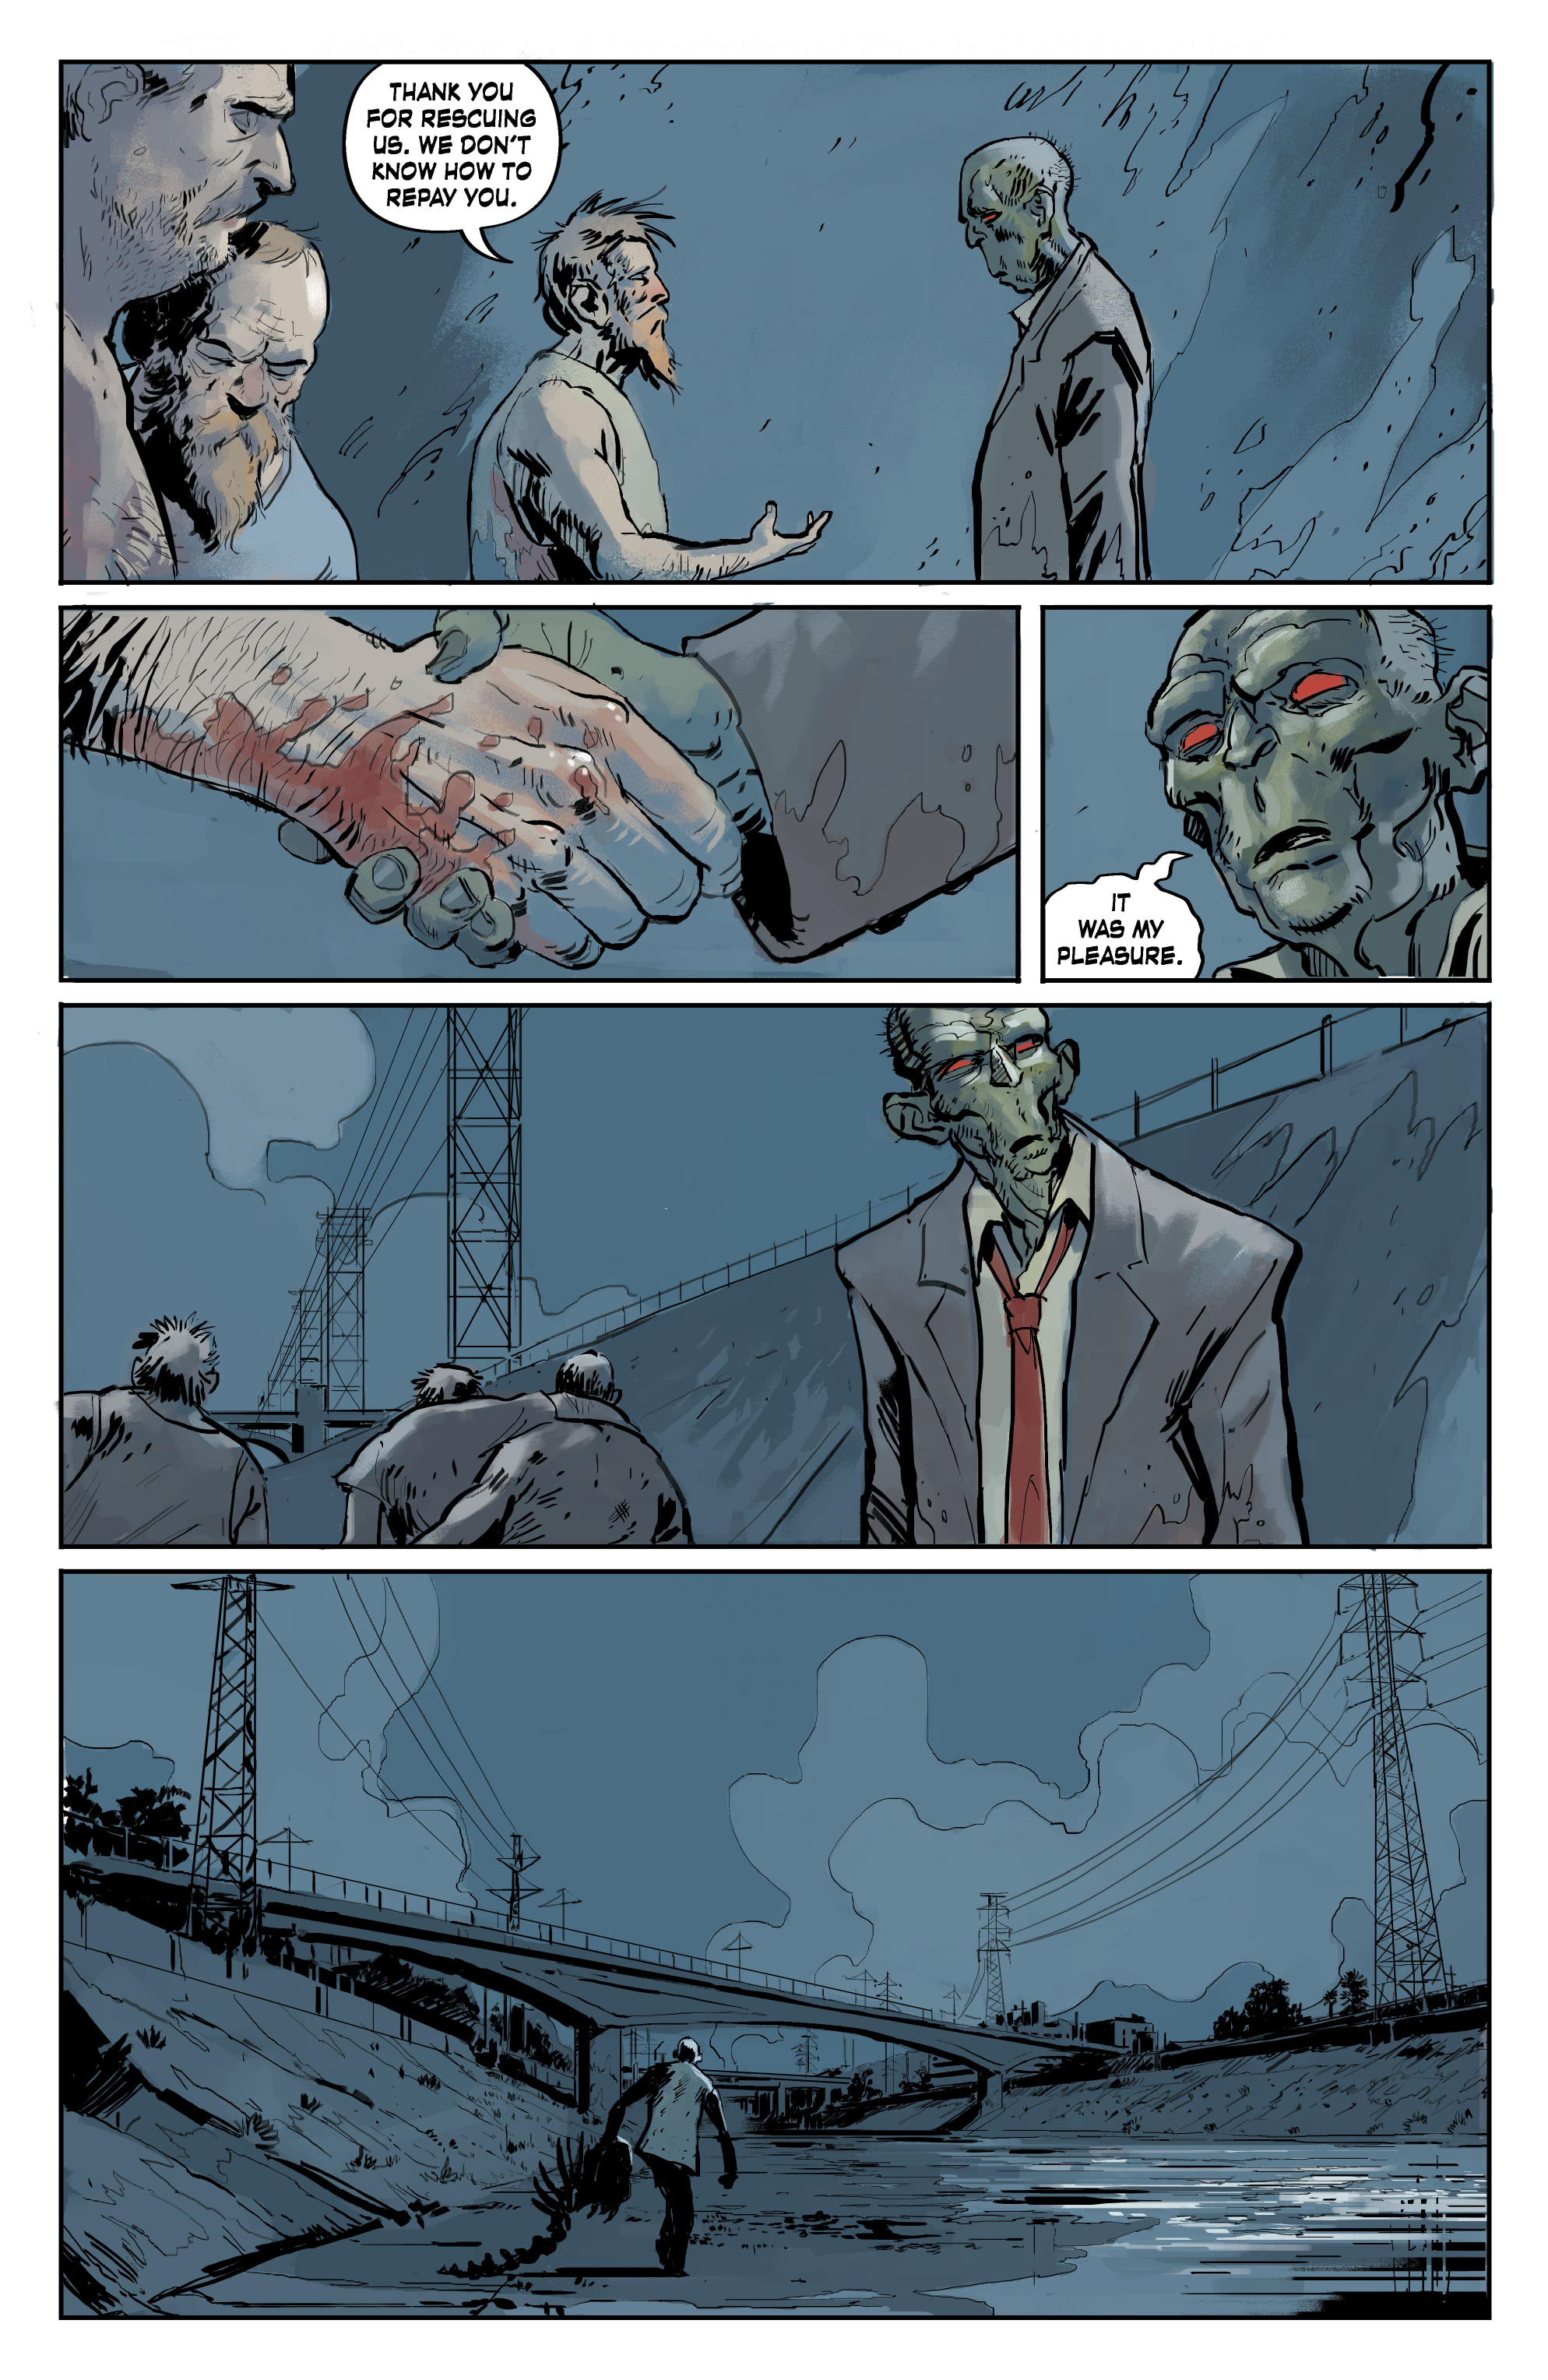 Criminal Macabre: The Big Bleed Out (2019-): Chapter 4 - Page 4